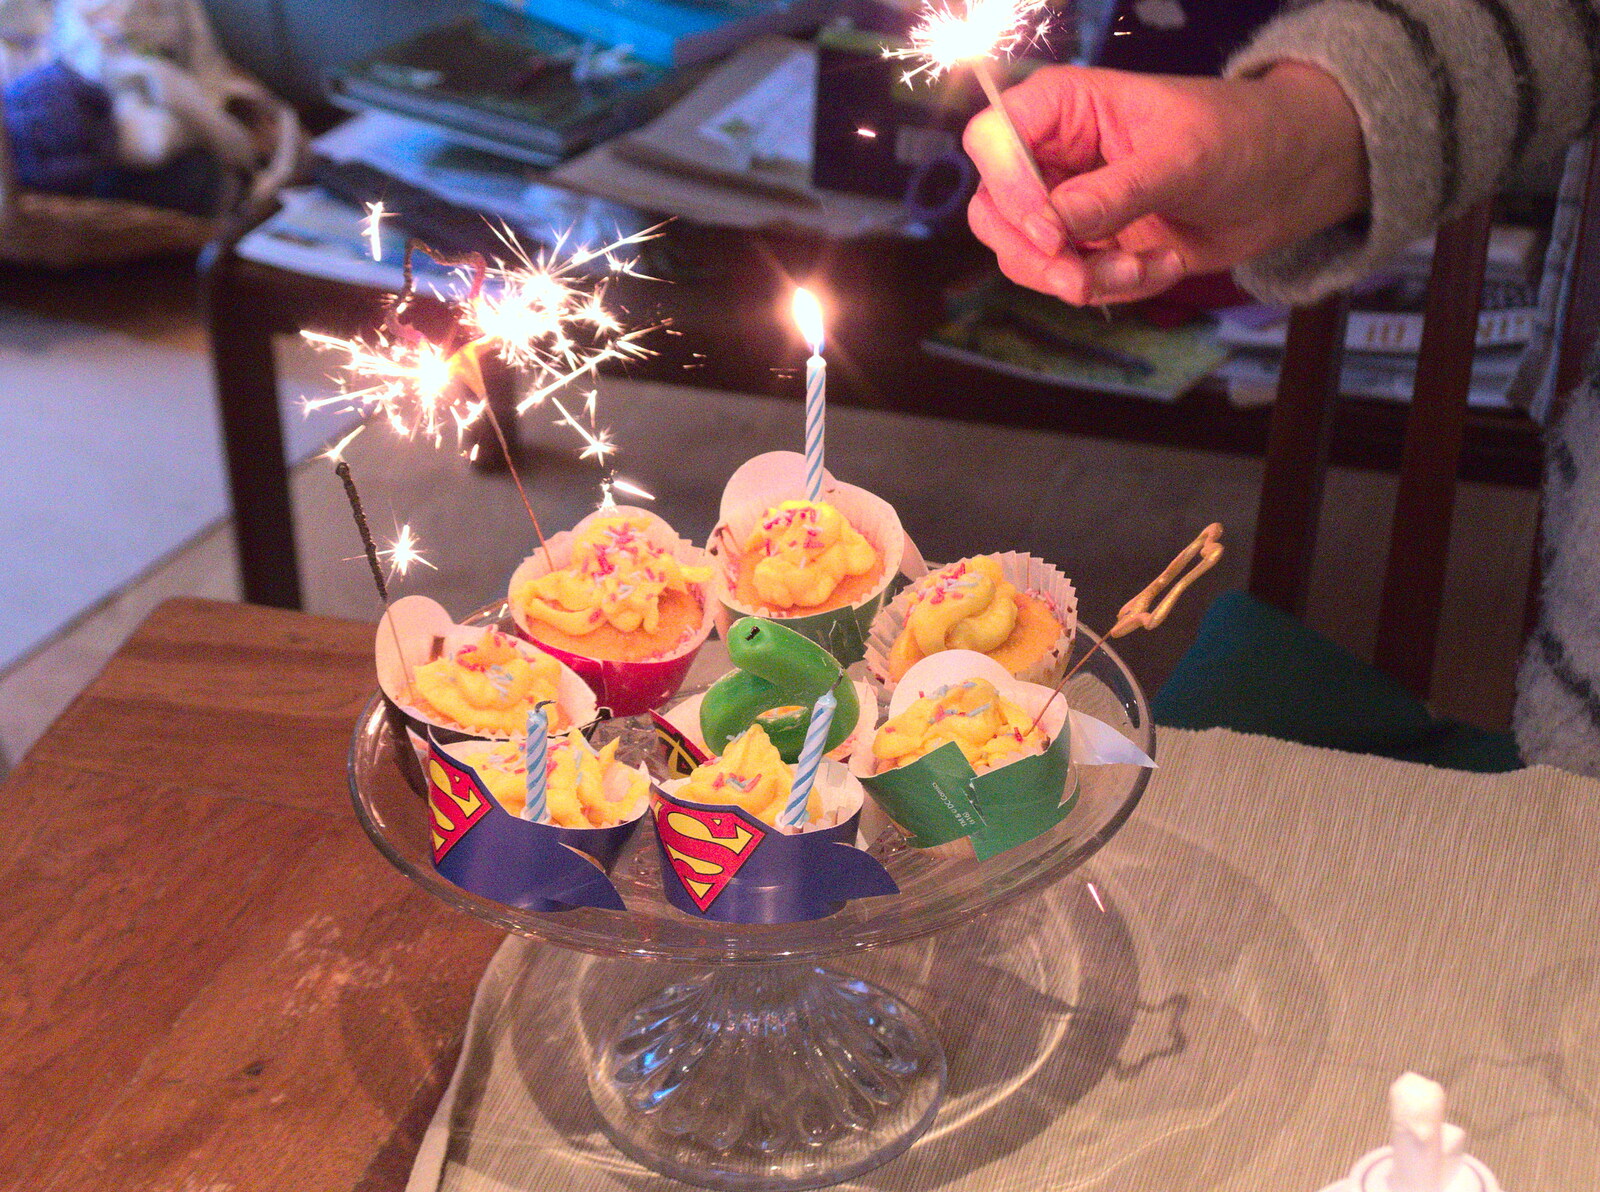 Sparkler cake action from Trackside Graffiti, and Harry's Cake, London and Suffolk - 28th March 2018